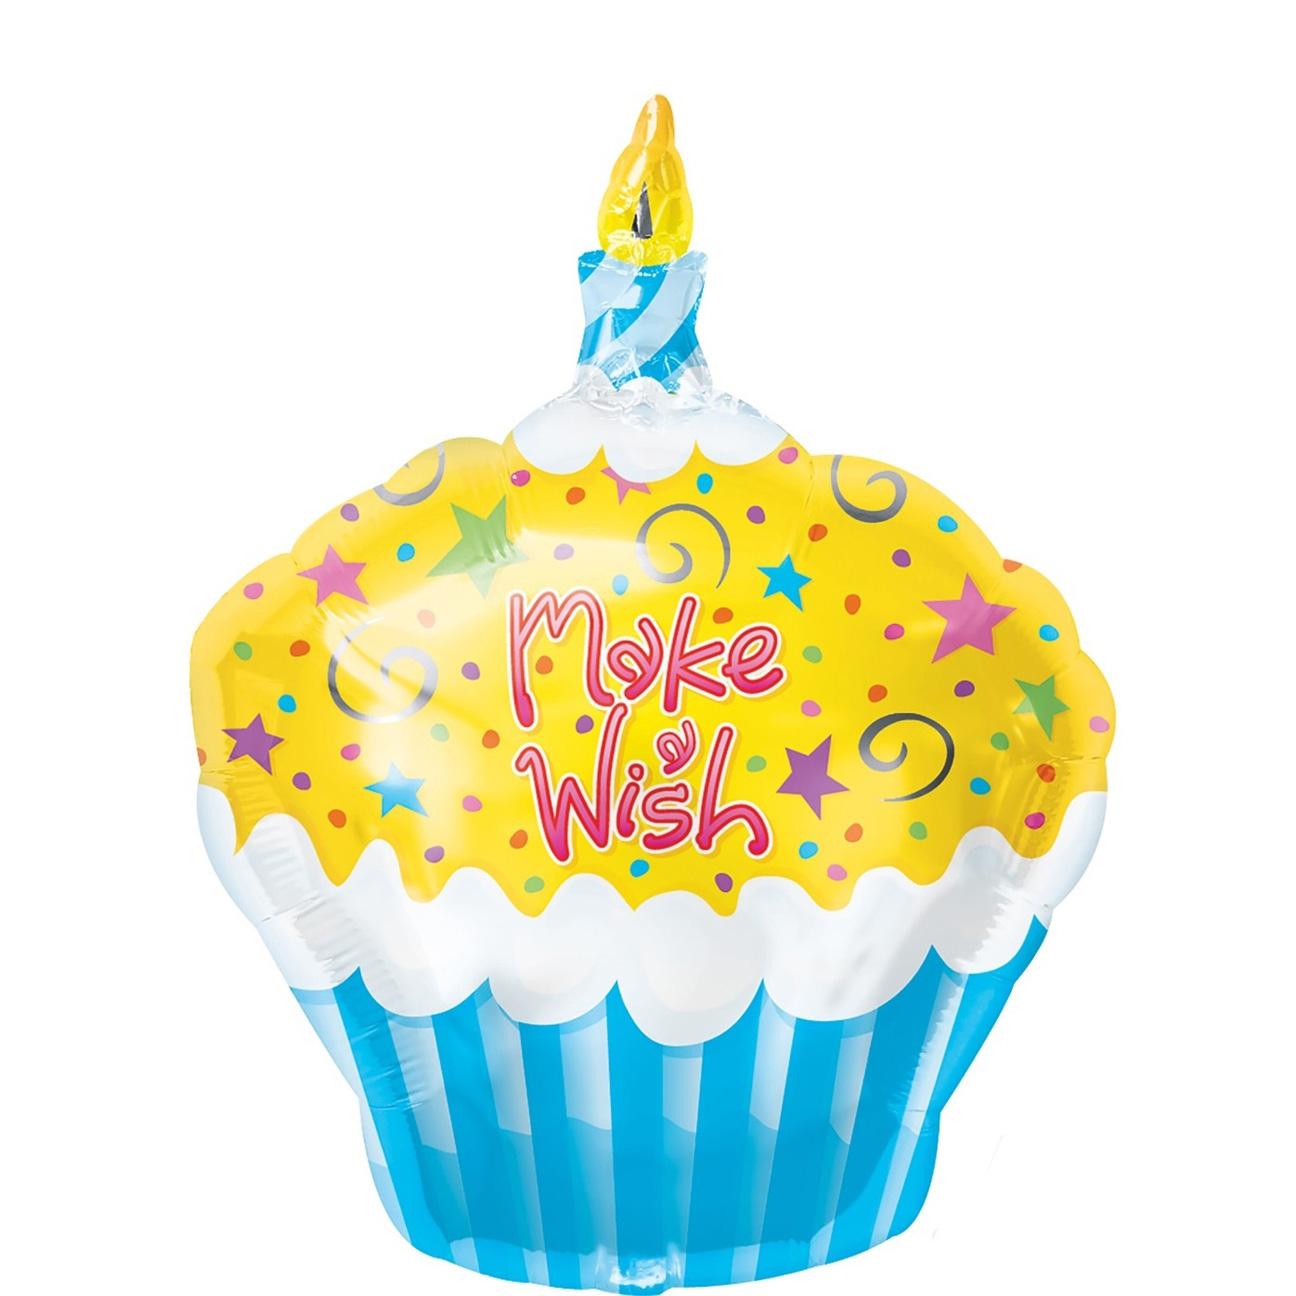 Make A Wish Cupcake Foil Balloon 18in Balloons & Streamers - Party Centre